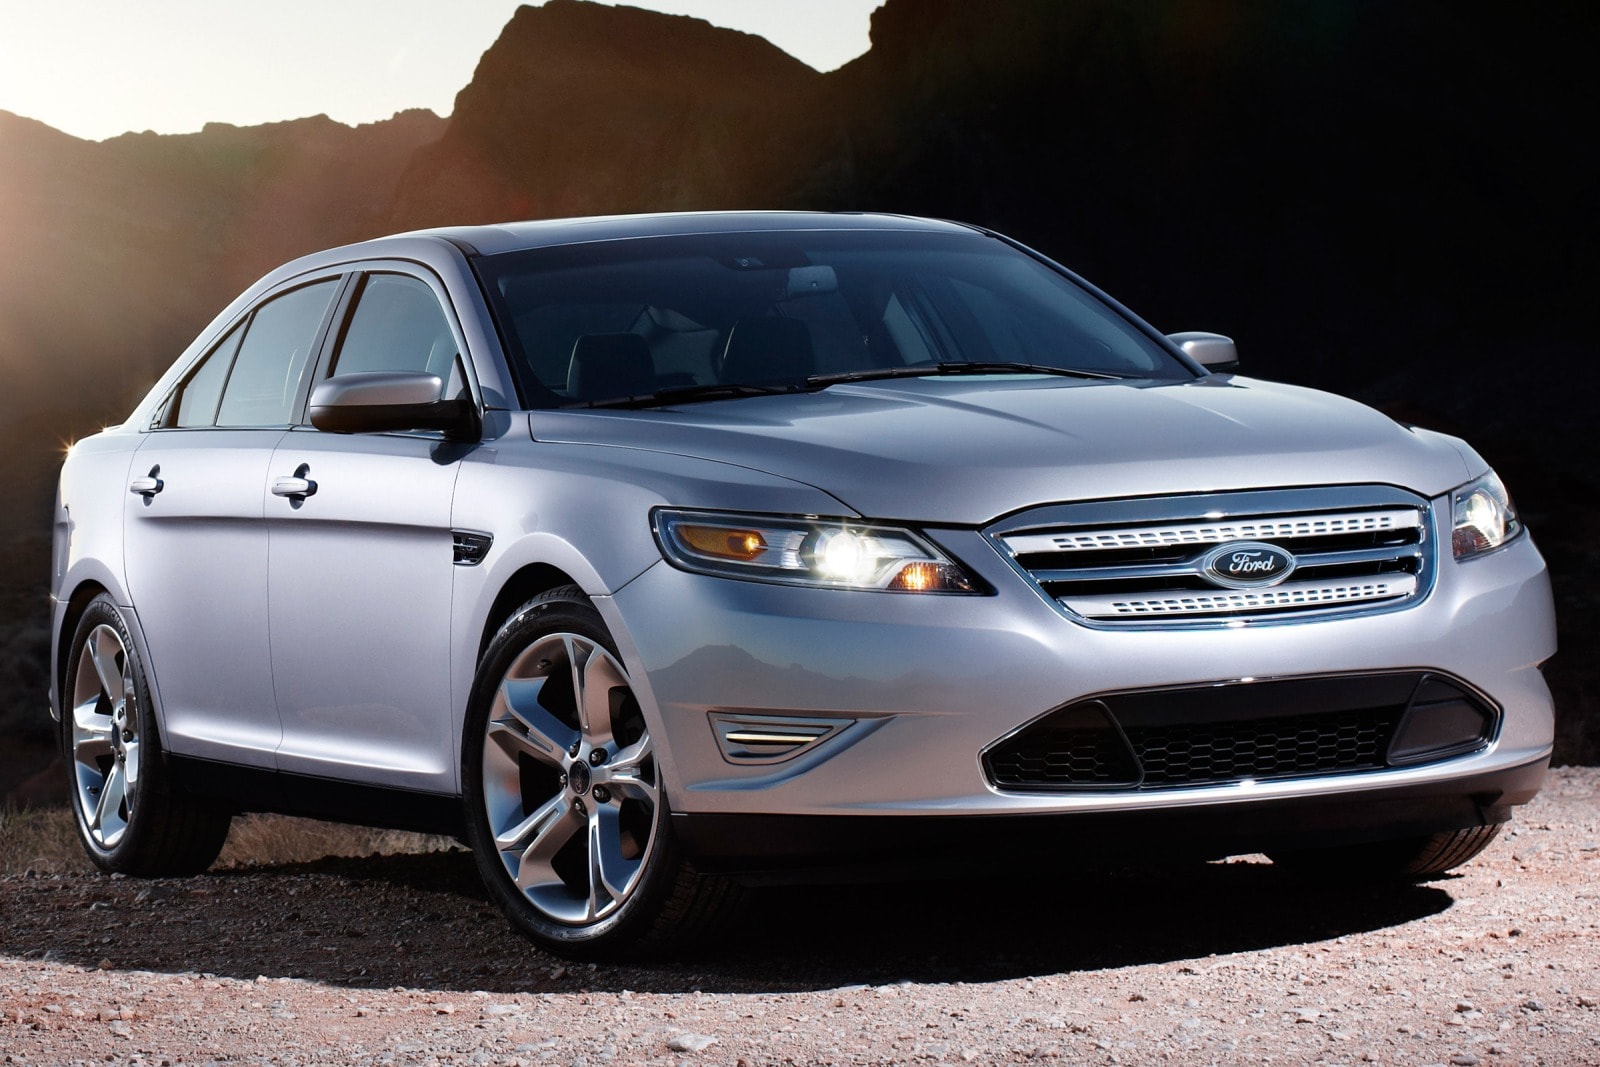 Used 2010 Ford Taurus SHO Review | Edmunds